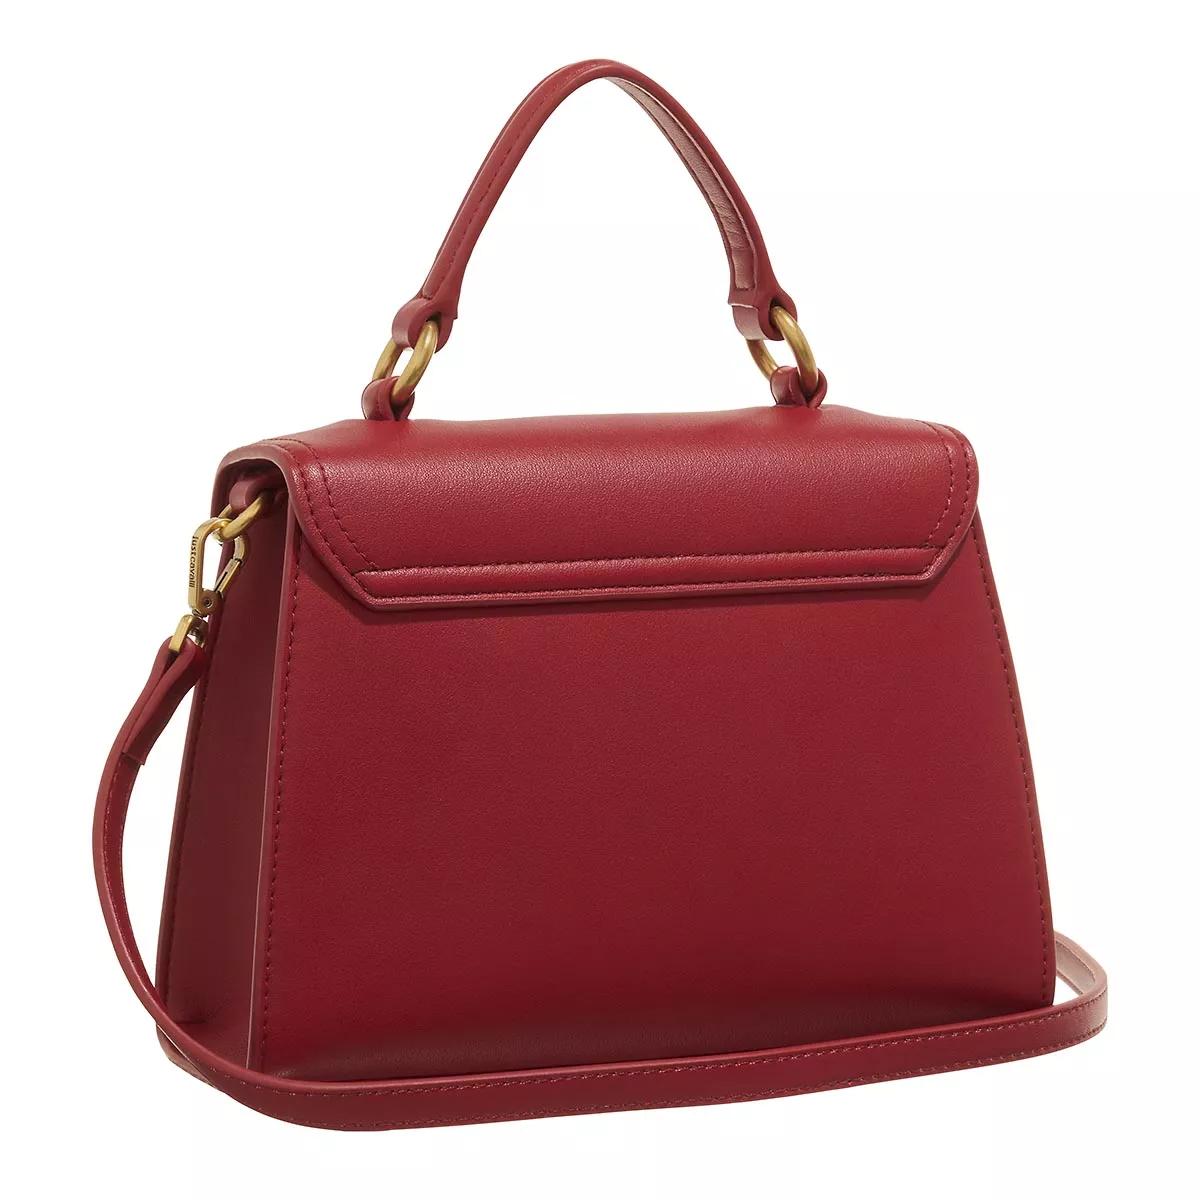 Just Cavalli Totes Range A Icon Bag Sketch 4 Bags in rood